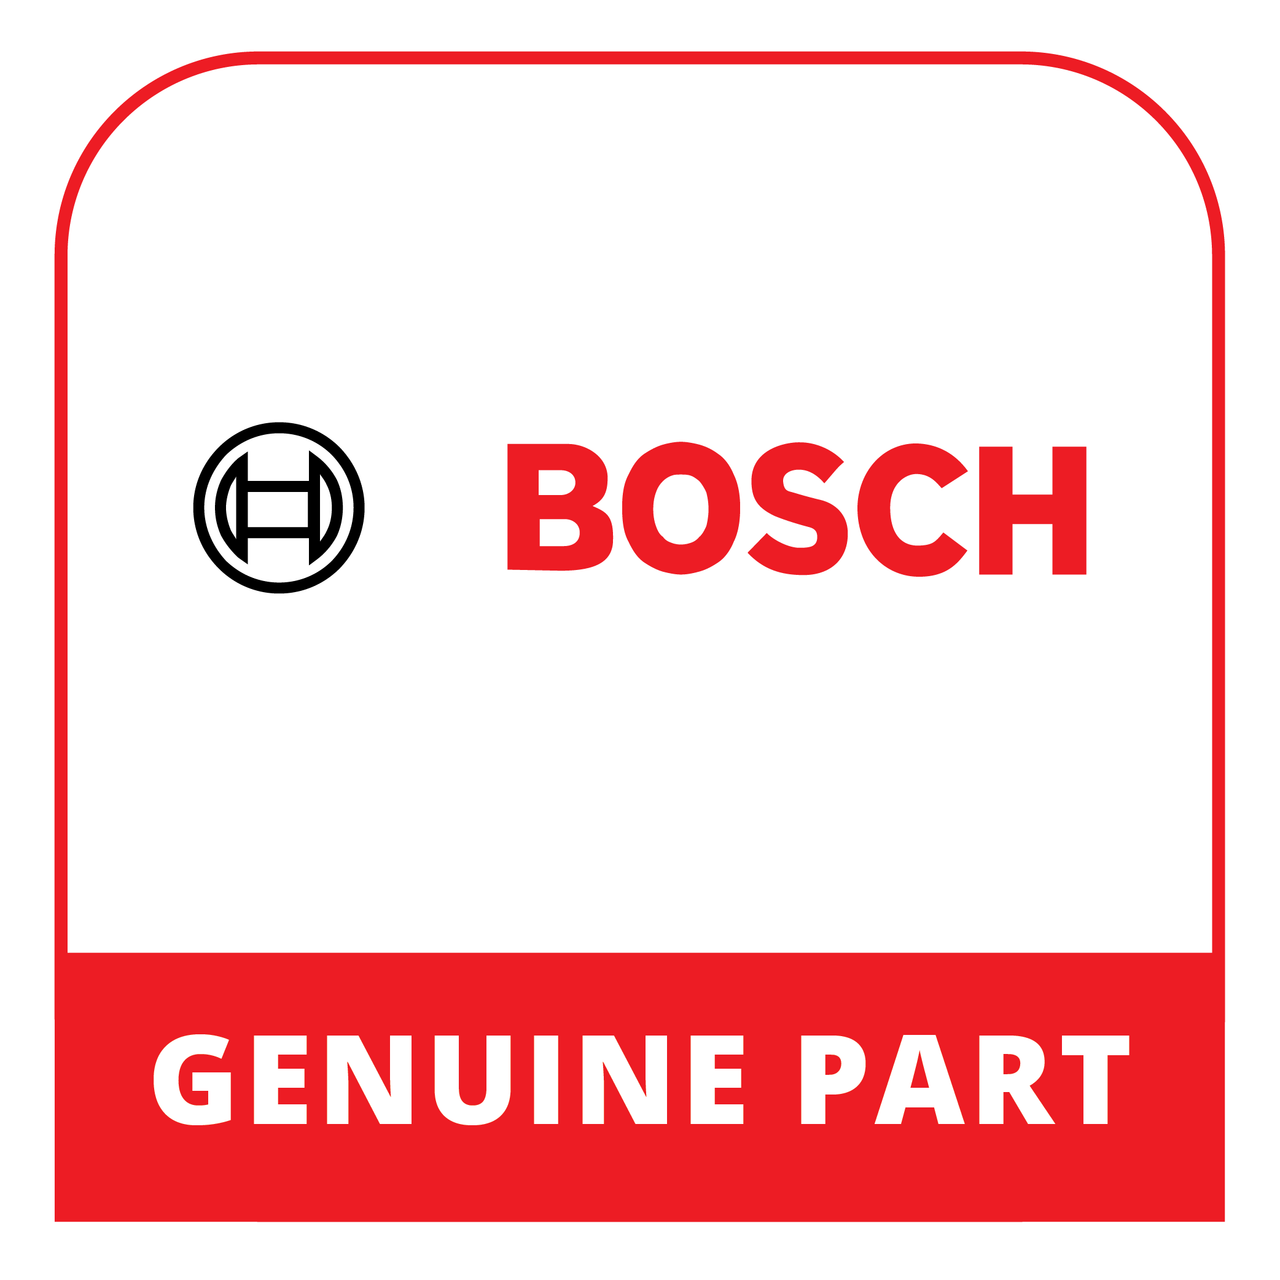 Bosch (Thermador) 11032354 - Operating Module - Genuine Bosch (Thermador) Part